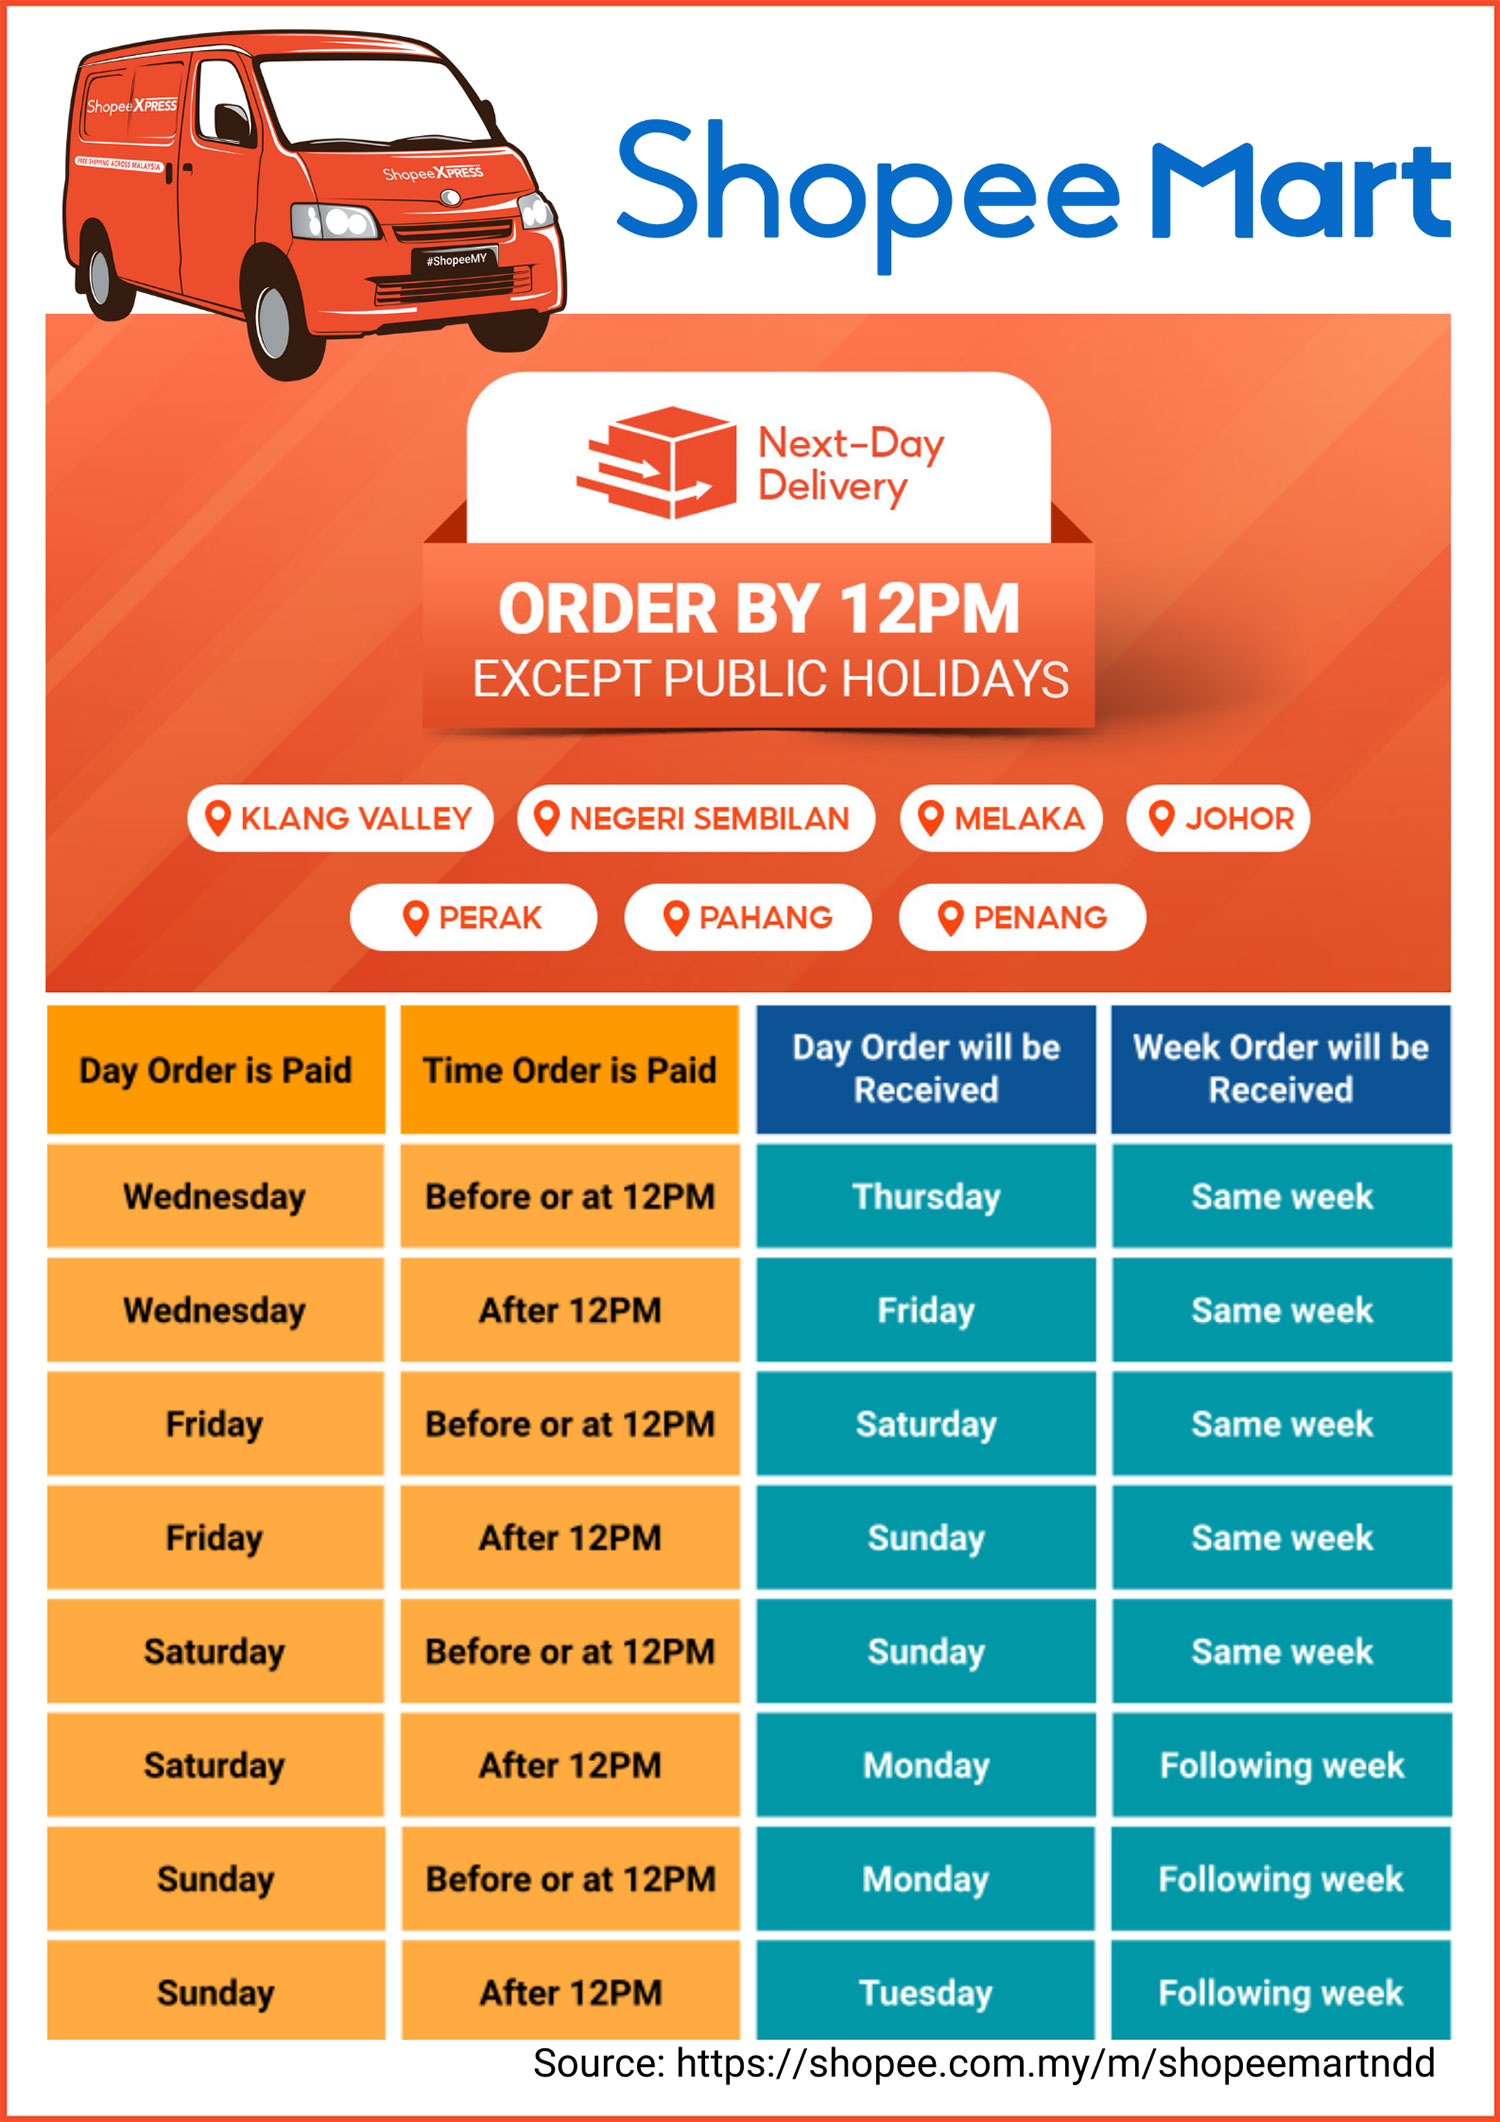 Example of Shopee's Next-Day Delivery Service Schedule